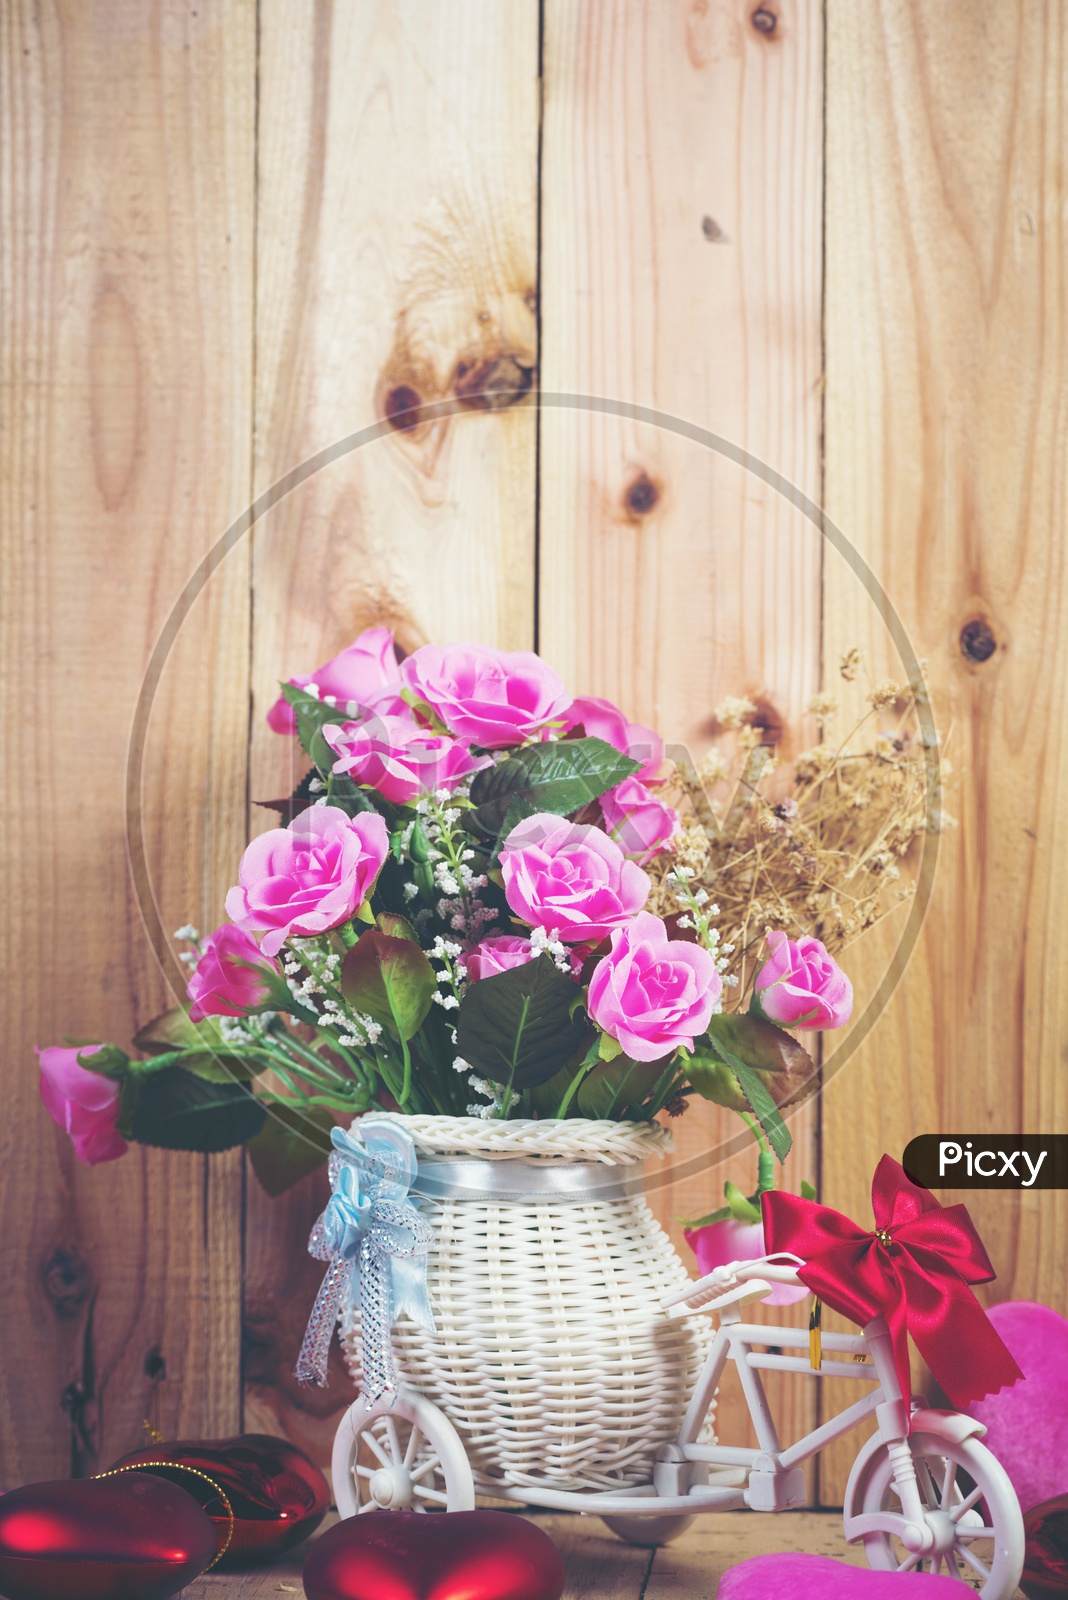 Rose Flowers in a Vase Over an Wooden  Background